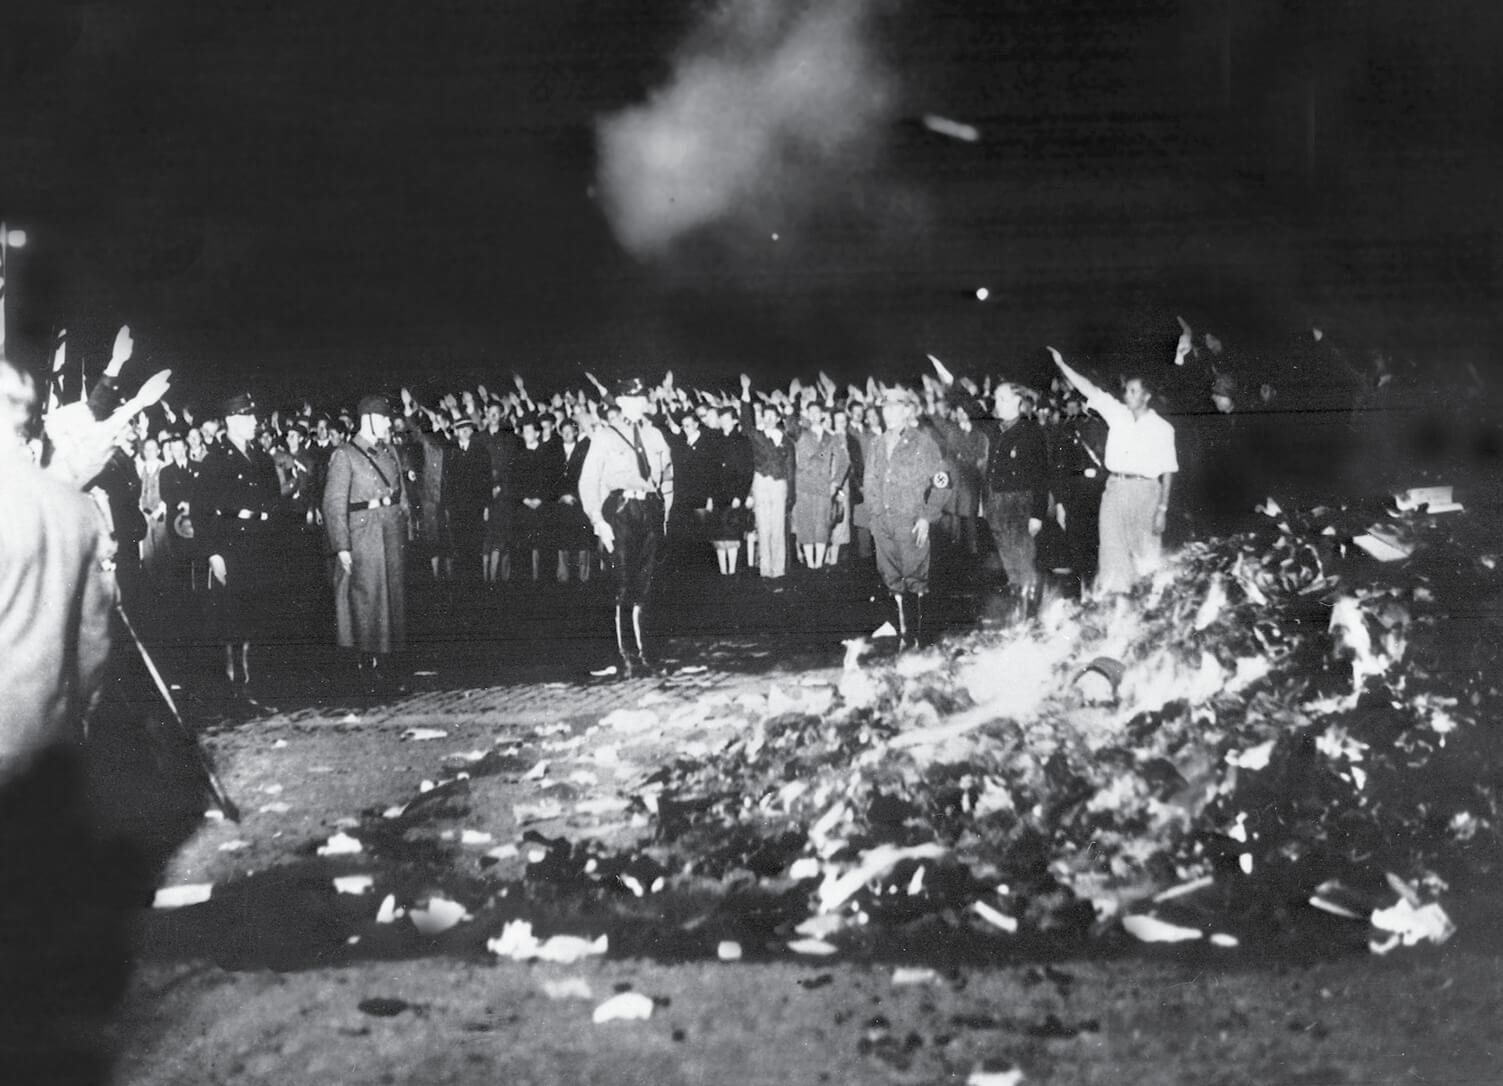 An image of a May tenth nineteen thirty two book burning organized by the Nazis at Berlin’s Opernplatz, now Bebelplatz.